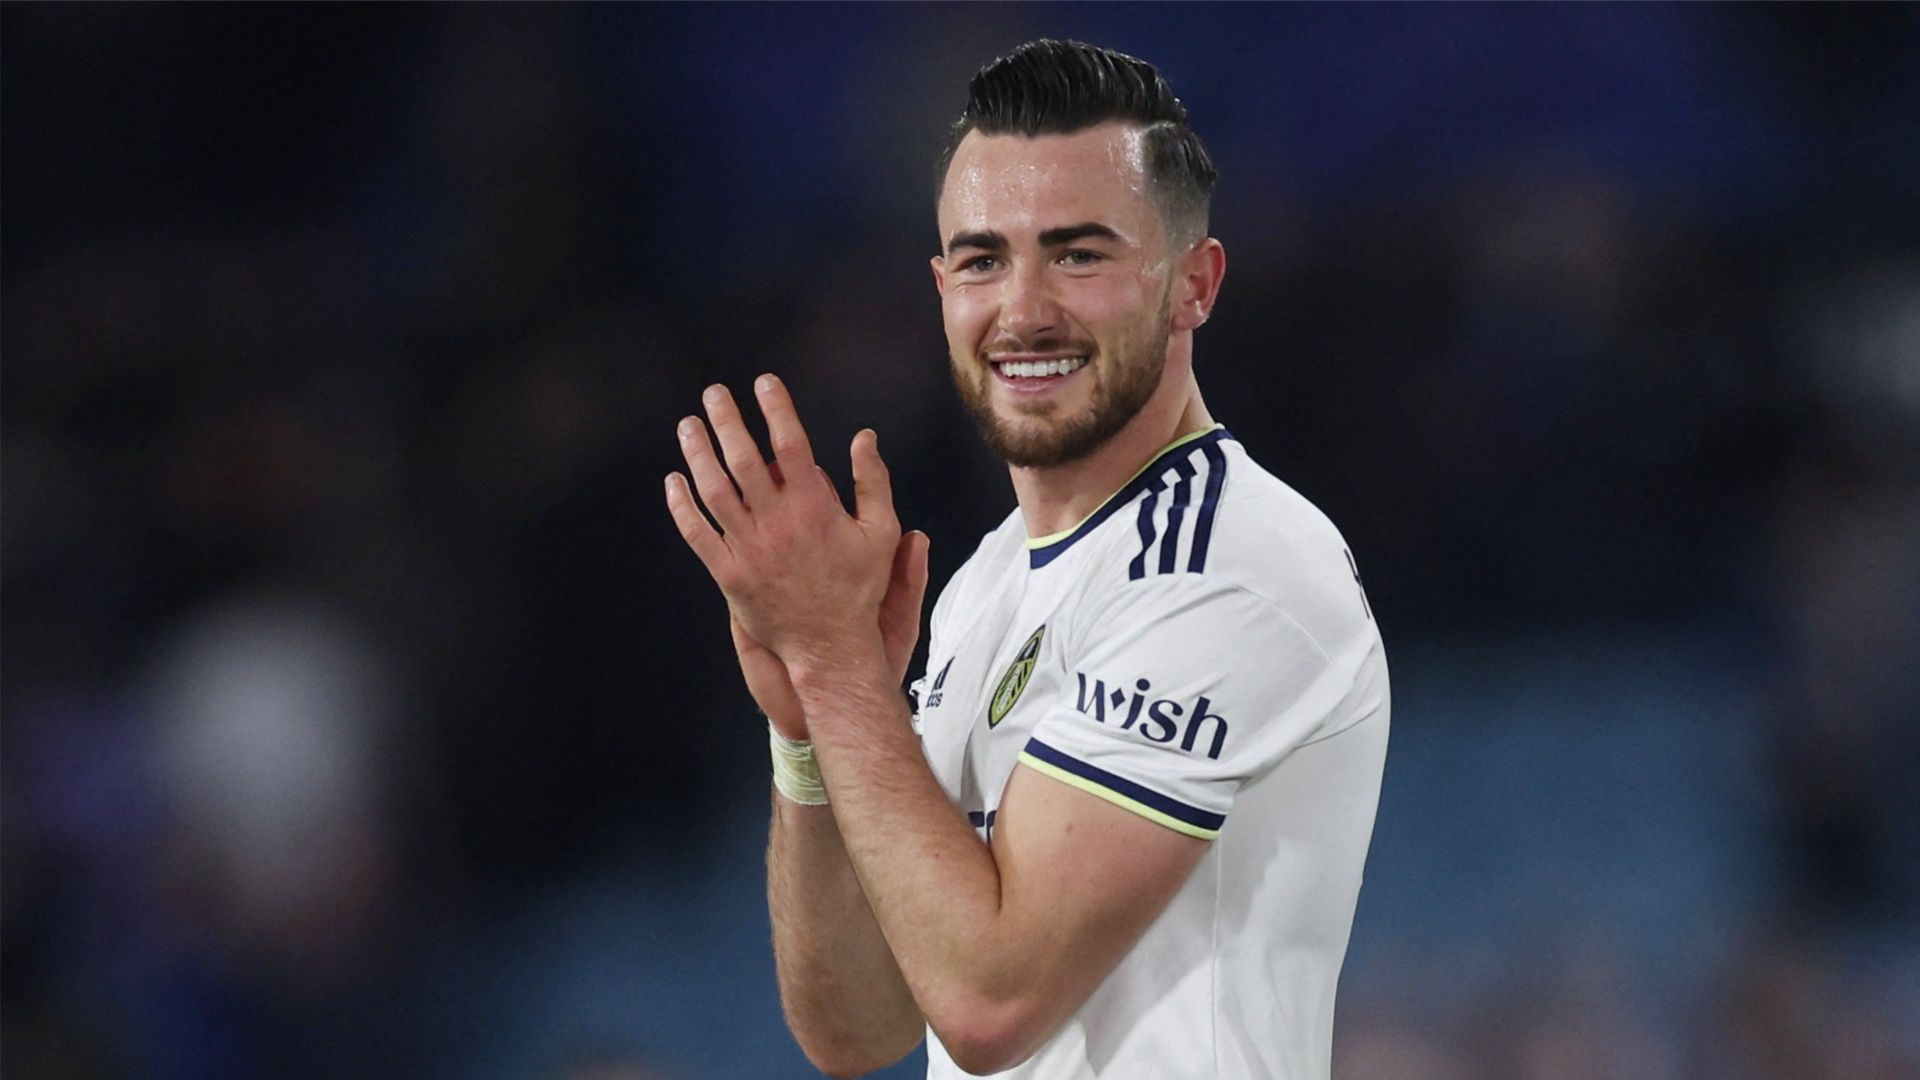 Jack Harrison has joined Everton on loan from Leeds United